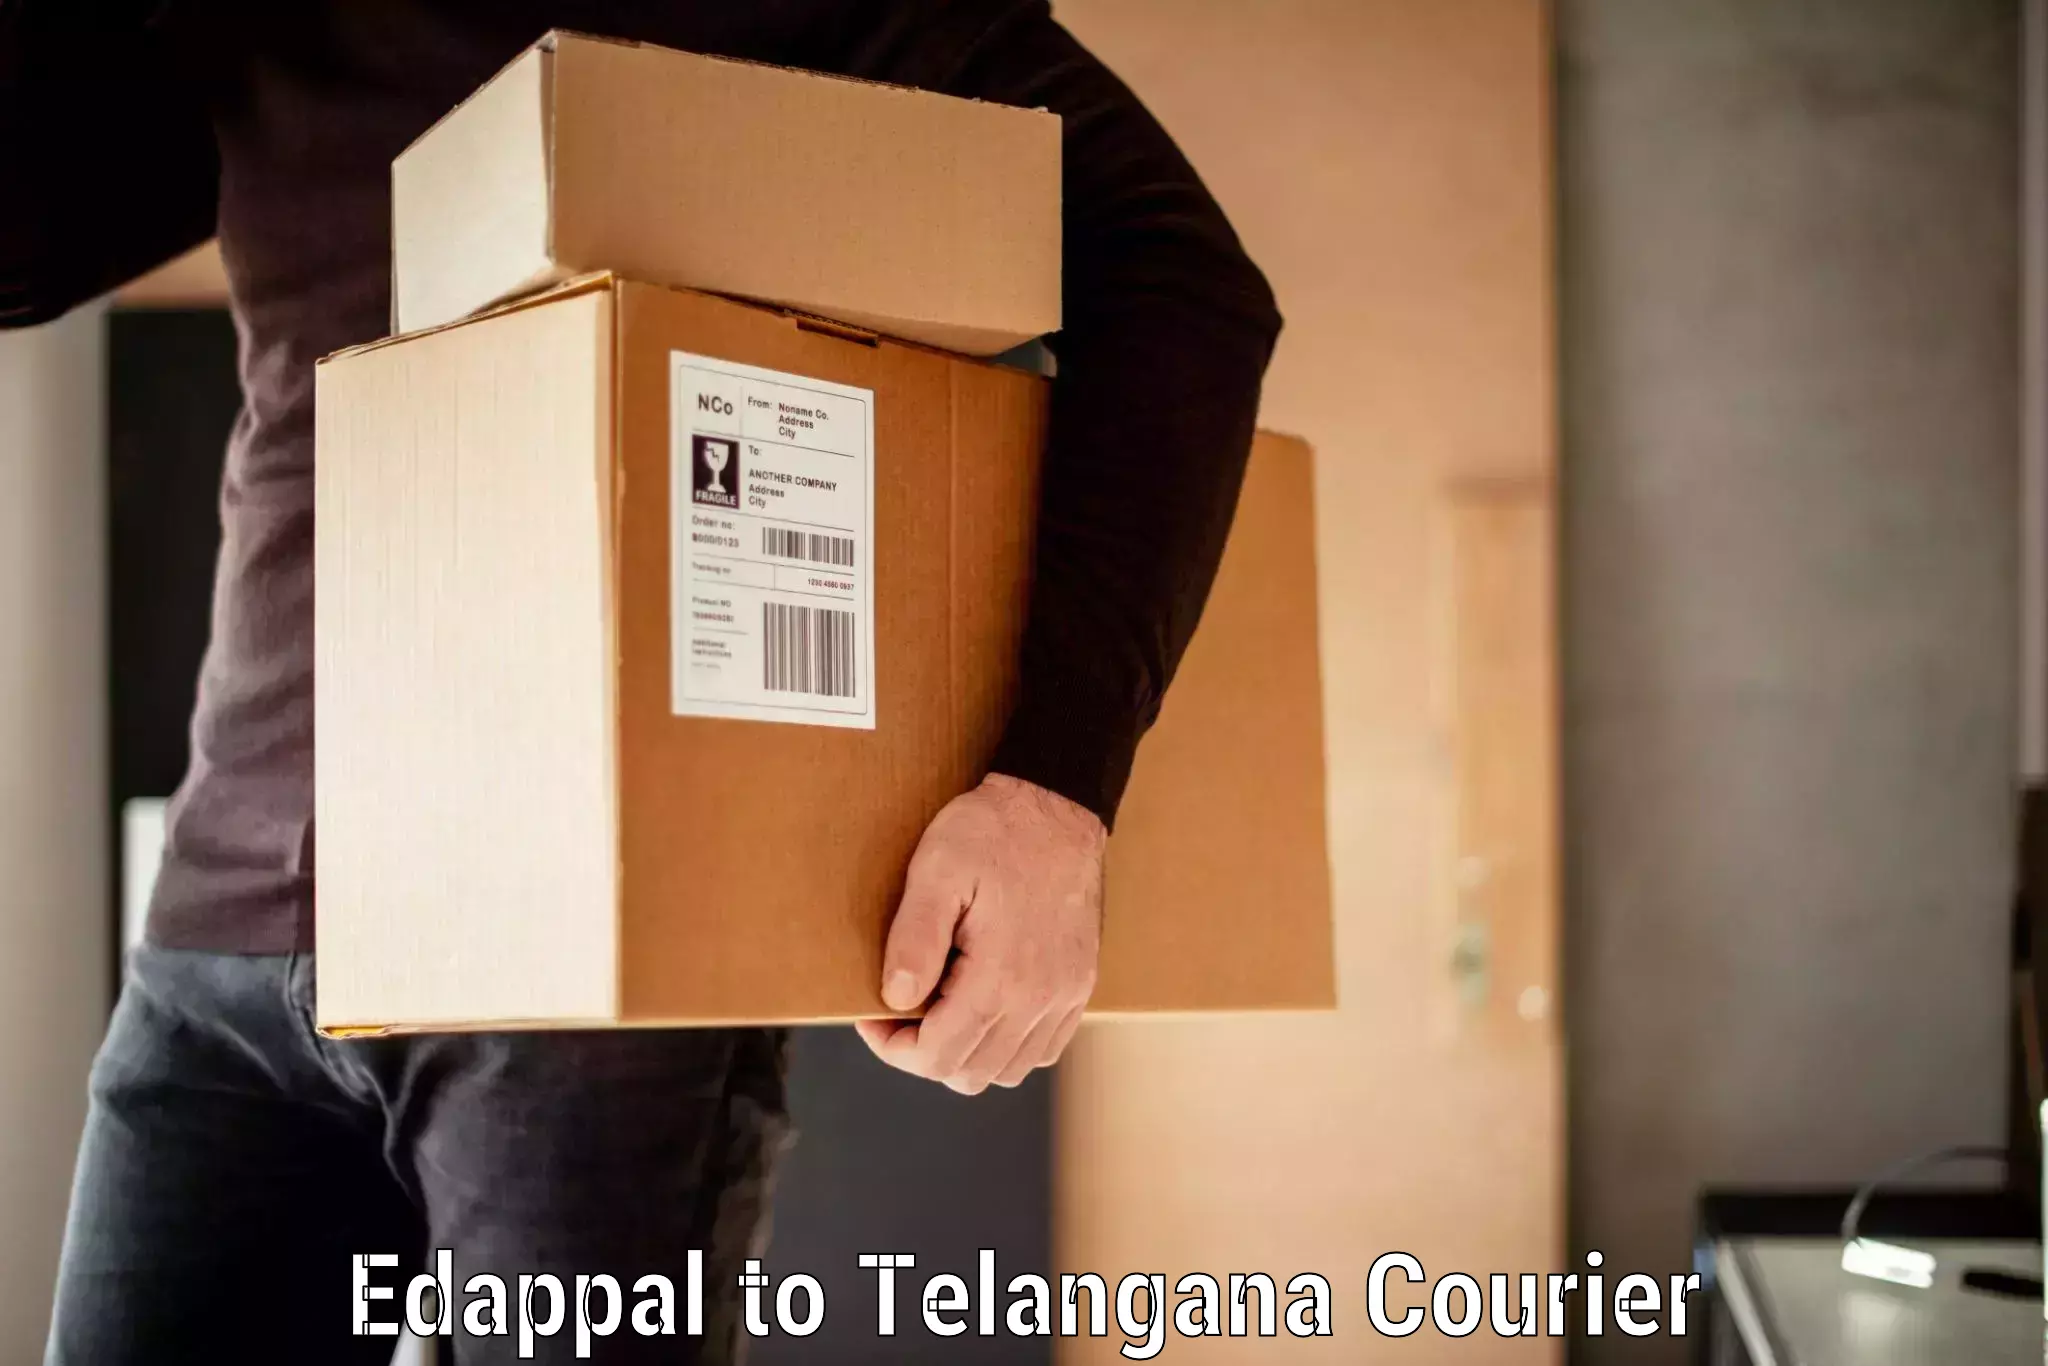 Baggage relocation service Edappal to Odela